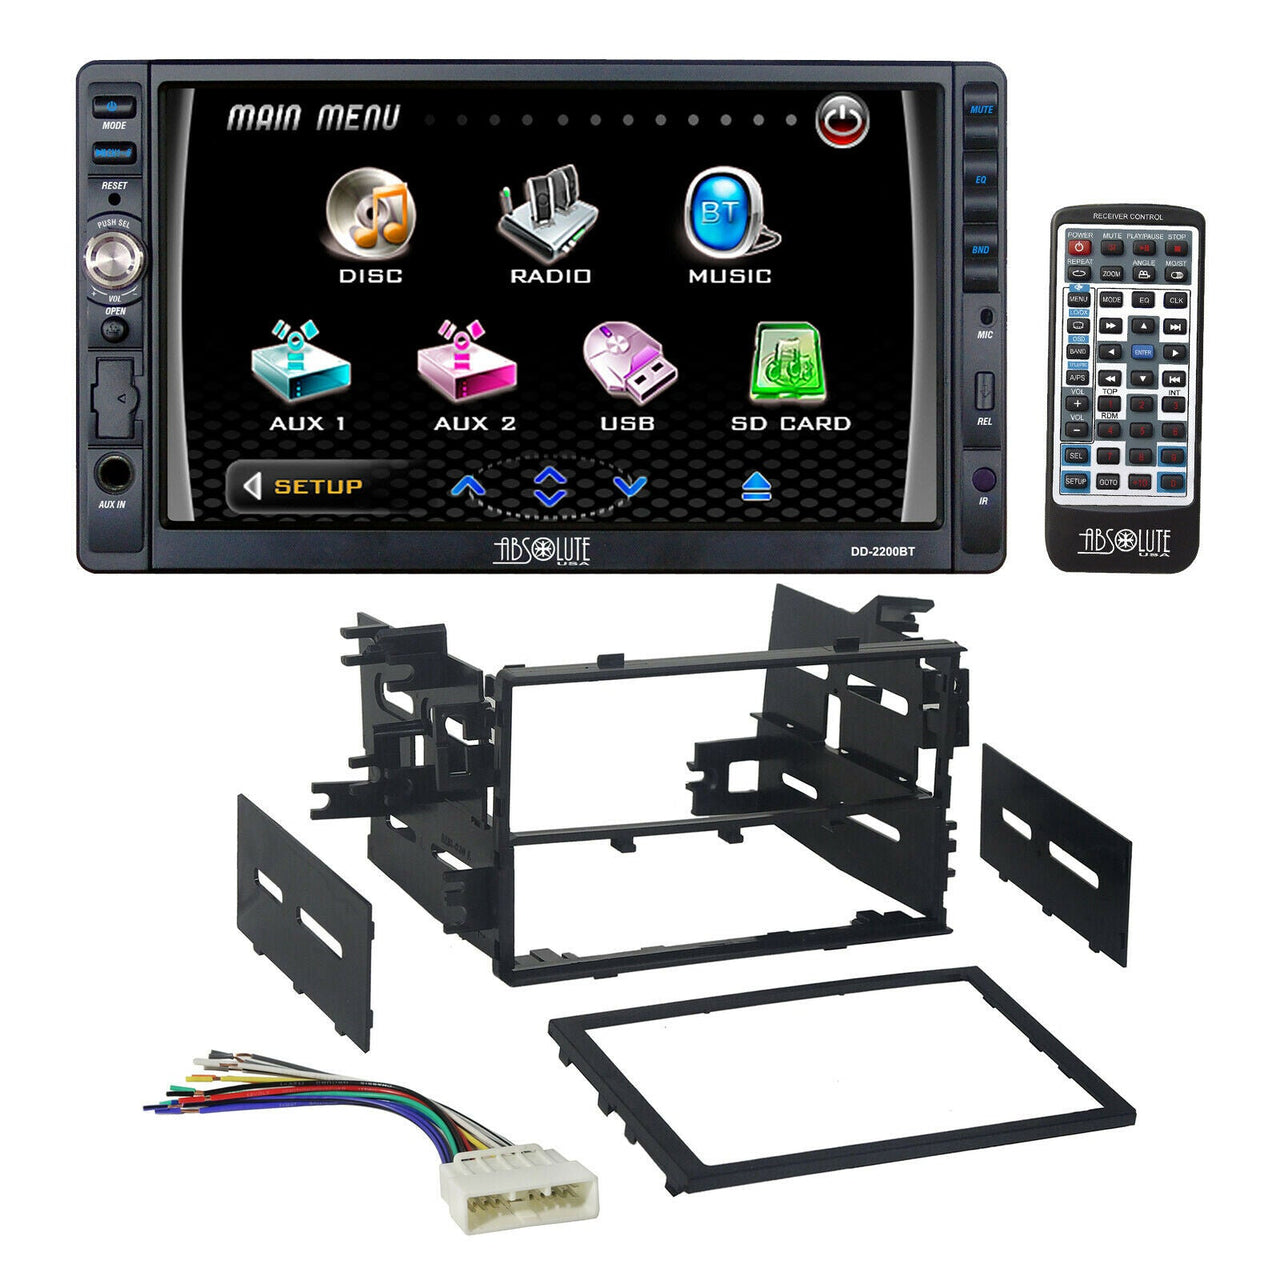 Absolute USA DD2200BT Double Din DVD, CD, MP3 Multimedia DVD CD MP3 Player Receiver With Dash Kit Harness for 86-up Honda Acura